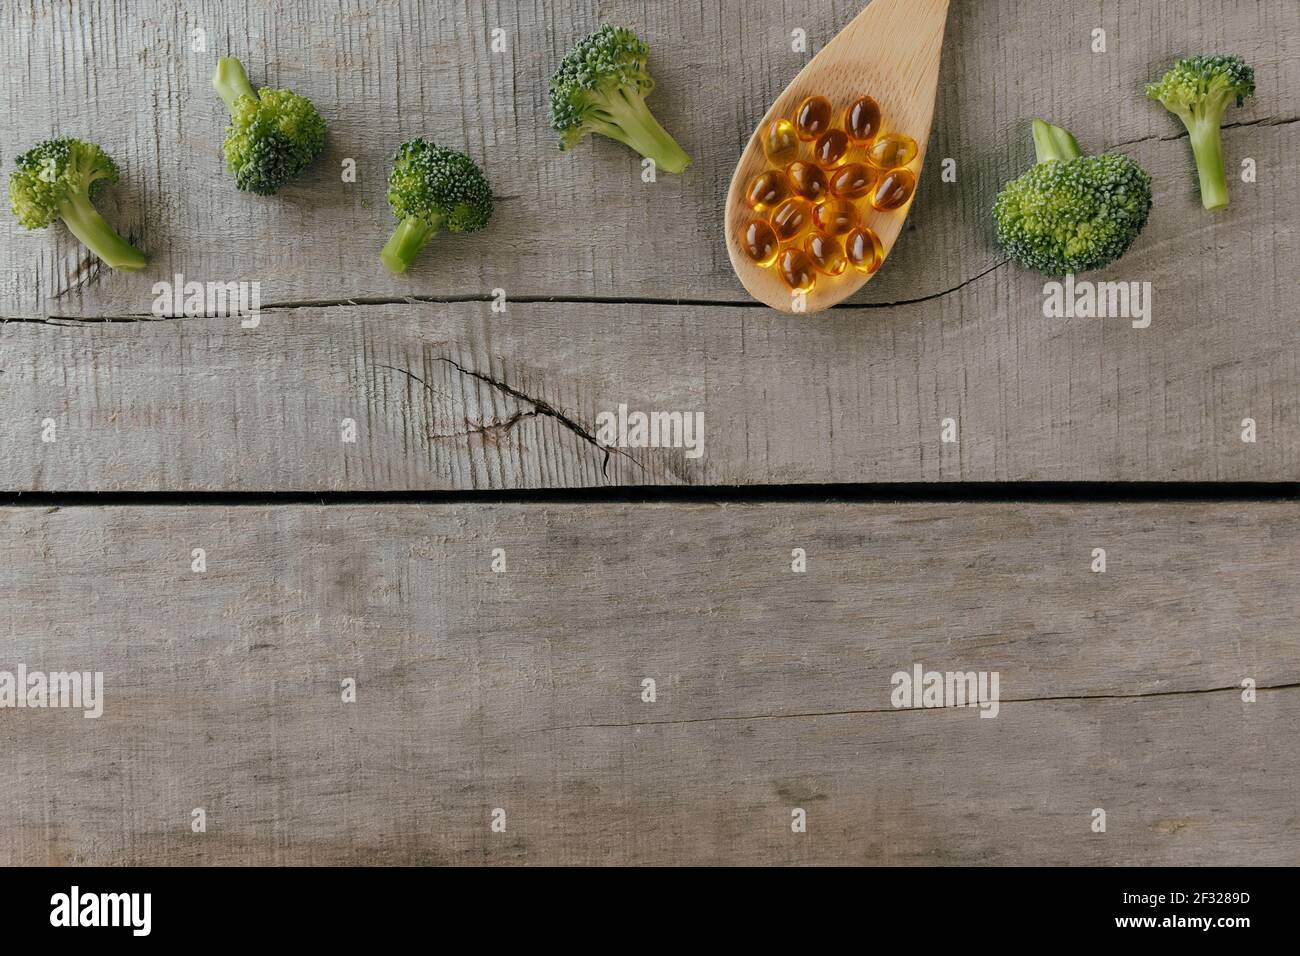 Flat lay with omega 3 capsules on wooden spoon, broccoli on wooden background. Natural medicine, health concept. Vitamin pills. High quality photo Stock Photo